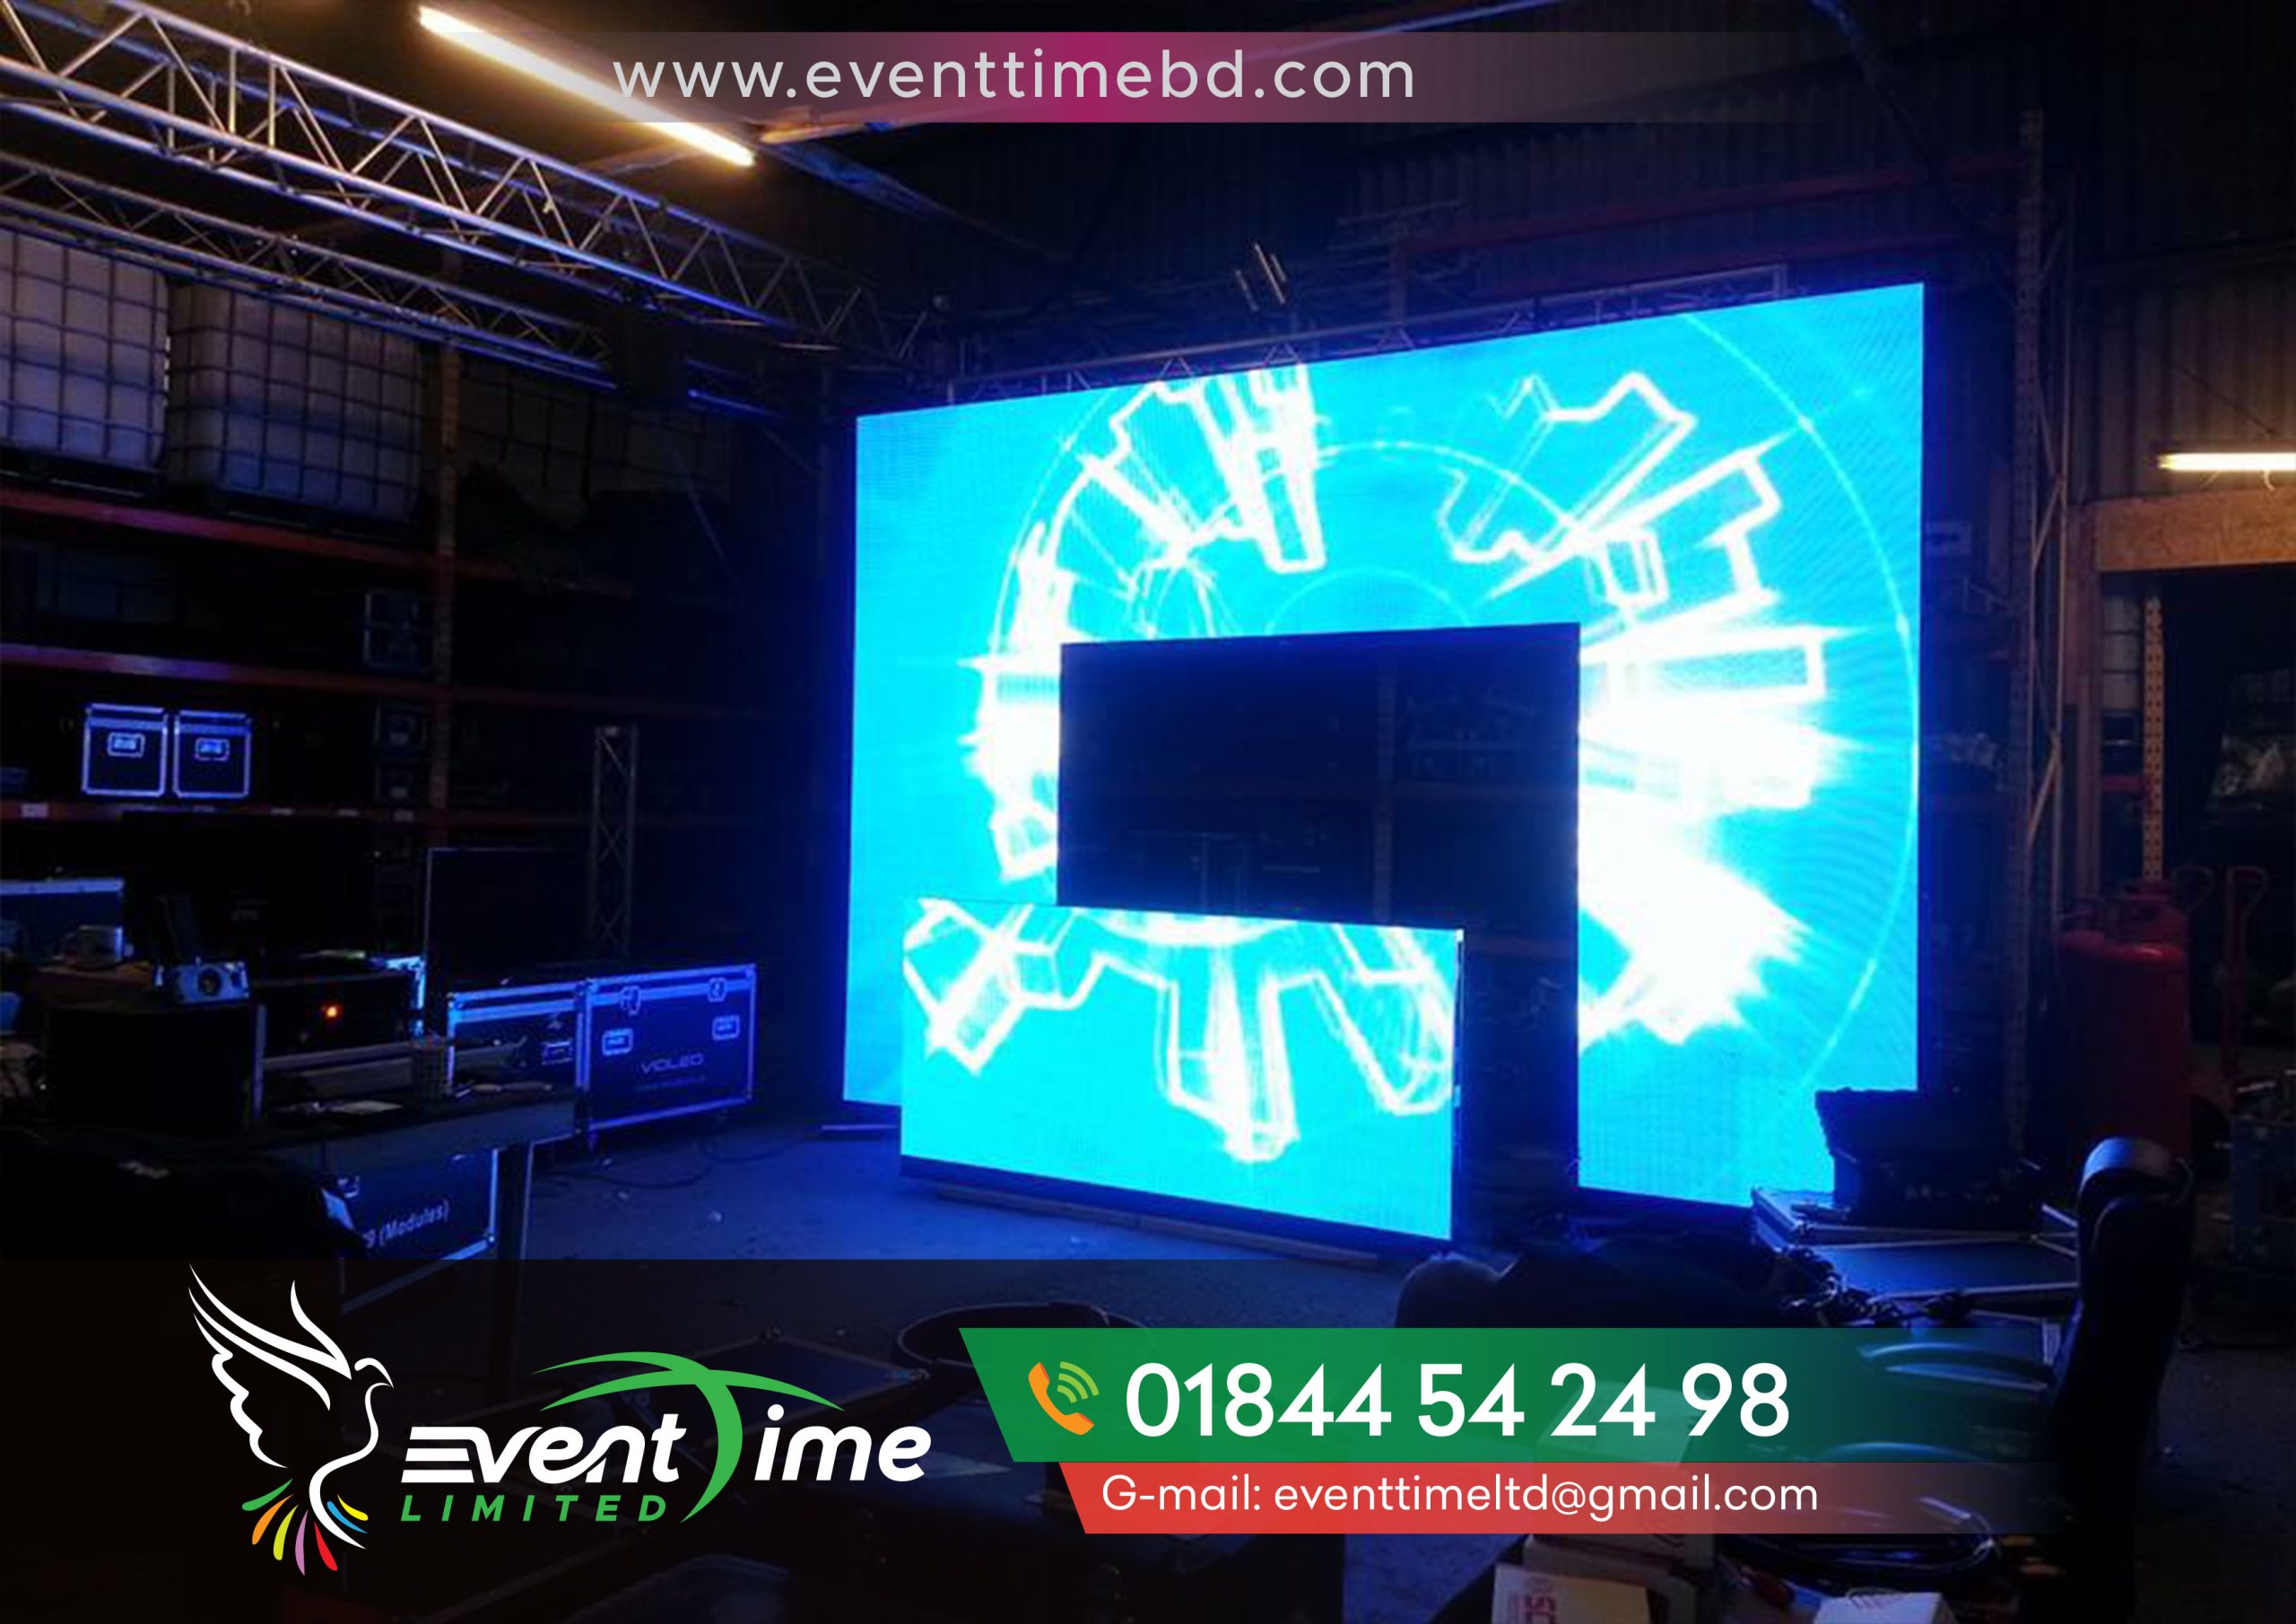 Best Event Rent Led Tv Screen Price in Bangladesh 2020-2023 Event Rent Led Screen Tv in Bangladesh’s company name is Event Time BD. Best LED Screen Rental. Best led screen rental in Bangladesh. Top LED Display Wall Rent in Bangladesh. Big LED Video Wall Screen Rental Dhaka. Best Top 10 LED Wall Screen Rental Event Companies. Rental led screen manufacturer pricing in Bangladesh. Brand New Rental led screen Manufacturer In Bd. Brand New Rental led screen Manufacturer In Bangladesh. Top 10 LED Scree display manufacturers. How to get Cheap Price Best LED Video Wall Display. Best Event LED Screen for Sharp & Clear Viewing. Top Best Full color Wall Mounted 12×10 LED Screen. Best Event Rent Led Tv Screen Price in Bangladesh 2020-2023 Led screen rental. Led wall rental. Rental display video wall. Led video wall rental. Rental led display. Flat screen tv rental. Video wall rental. Led screen rental near me. Led screens for events. Jumbotron rental. Led wall rental near me. Mobile led screen rental. Led screen hire. Led panel rental. Led rental screen. Video wall rental near me. Large led screen rental. Video wall rental cost. Hire video wall. Led wall for hire. Led display hire. Outdoor led screen rental. Indoor rental led display. Led wall rental cost. Outdoor rental led display. Led rental display. Lcd screen rental. Led rental near me. Led video wall rental near me. Led wall rental price. Led screen rental cost. Led display screen rental. Led screen event. Digital screen rental. Led video screen rental. Led screen rental price. Outdoor led screen rental near me. Led screen for stage rental. Led video wall rental cost. Screens for hire. Led screen truck rental. Indoor led screen rental. Mobile led screen rental near me. Led screen panels rental. Rental led display screen. Giant led screen rental. Led screens for events price. Led wall hire. Led video wall hire. Led screen hire for events. 8x12 led screen rental. Screen hire for events. Led screen for marriage rent. Led wall for rent near me. Tv screen hire. Led screen for rent near me. Led screen hire price. Outdoor led screen hire. Tv screen hire for events. P2 6 indoor rental led display. Led wall screen rental. Lcd screen hire. Led backdrop screen rental. Mobile led screen hire. P3 91 outdoor rental led display. Large screen hire. Big screen hire for events. Led screen hire near me. Led screen panel for rent. Led wall event. Led screen display rental. Stage led screen rental. Event led screen rental. P4 81 outdoor rental led display. Led display screen for rent. P5 outdoor rental led display. P3 91 indoor rental led display. Led panel rental price. Big led screen rental. Video display hire. Led stage screen rental. Indoor led screen hire. Outdoor tv screen hire. Indoor rental led screen. Led screen truck rental near me. Outdoor led display rental. Video wall hire cost. Led panel screen rental. Jumbotron rental cost. Led screen wall rental. Rent a led screen. Outdoor led screen rental price. P2 5 indoor rental led display. Digital display screen rental. Led screen rent price. Hire led video wall. Led screens for events rent. P3 91 indoor led screen. Led screen rental long beach. Outdoor tv screen hire prices. Large led screen hire. Video screen hire. Digital display rental. Outdoor rental led screen. Led display rental company. Large tv screen hire. Led rental screen price. Stage screen rental. Rental outdoor led display. Outdoor video wall rental. Led screen rental high point. Large outdoor led screen for hire. Led wall display rental. Led board rental. Led display board rental. Lcd tv hire. Led screen p2 97. Led video wall rental price. Led display for rent. Led projector hire. Video wall rental price. Mobile led truck rental. Giant screen hire. Hire a tv screen. Hire flat screen tv. Big screen hire price. Display screen hire. Led screen rental company. Digital display hire. Transparent led screen rental. Outdoor led screen for rent. Led display board for rent. P4 indoor rental led display. Led screen hire cost. Led outdoor screen rental. Big tv screen hire. Led trailer screen hire. Rent video wall displays. Outdoor led rental. Led screen hire events ltd. P3 91 rental led display. Led video wall hire cost. Big screens for hire. Big screen hire events. Stage rental led screen. Mobile led screen rental cost. Large video screen rental. Jumbotron rental prices. Jumbotron screen rentals. Led video screen hire. Led video panel rental. Screens to hire. Portable led screen rental. Led video curtain rental. Led wall rental company. Hd rental led display. Large video wall rental. Smd screen rental. Led wall rental. Rental display video wall. Led video wall rental. Led screen rental price list. Video wall rental. Led wall rental near me. Led rental screen. Led wall rental price. 8x12 led screen rental. Led screen rental cost. Video wall rental near me. Led display screen rental. Video wall rental cost. Led wall screen rental. Led backdrop screen rental. Stage led screen rental. Led video screen rental. Led screen rental price. Led screen for stage rental. Led panel rental price. Led panel screen rental. Outdoor led screen rental price. Led screen for rental. Rental led screen manufacturer. Rental led display manufacturer. Best Top 10 LED Wall Screen Rental Event Companies Are you planning an event in Bangladesh and looking to create a captivating visual experience for your audience? Look no further than Event Time BD, a premier company specializing in LED screen TV rentals. With an extensive range of LED screens and professional services, Event Time BD is your go-to solution for all your event’s visual needs. When it comes to event planning, the right visual elements can significantly enhance the overall atmosphere. Best Event Rent Led Tv Screen Price in Bangladesh 2020-2023 Best Event Rent Led Tv Screen Price in Bangladesh 2020-2023 LED screen rentals provide a dynamic and immersive experience for your audience, elevating your event to the next level. With Event Time BD, you can access state-of-the-art LED screens that deliver high-resolution visuals, vibrant colors, and exceptional clarity. For events that require larger-than-life visuals, LED wall rentals offer a stunning visual backdrop that captivates your audience. Whether it’s a corporate conference, concert, or wedding reception, Event Time BD provides LED wall rentals that can transform any venue into a captivating visual spectacle. How to get Cheap Price Best LED Video Wall Display 2023 Best LED Display Video walls are a powerful tool for showcasing dynamic content and captivating your audience’s attention. Event Time BD offers versatile video wall rentals that allow you to display engaging visuals, promotional videos, live feeds, and more. With customizable configurations and seamless integration, you can create an impactful visual experience tailored to your event. Event Time BD understands the importance of convenience when planning an event. With rental LED displays, you can enjoy hassle-free setup, professional support, and flexible rental durations. Whether you need a single LED display or a comprehensive setup, Event Time BD has the expertise and equipment to meet your requirements. Best Event Rent Led Tv Screen Price in Bangladesh 2020-2023 Flat screen TVs provide a sleek and modern visual solution for events of any scale. Event Time BD offers a wide selection of flat screen TV rentals, ranging in sizes to suit your specific needs. From trade shows to private functions, these flat screen TVs deliver crystal-clear visuals and seamless integration with other event elements. Event Time BD are perfect for outdoor events, sports gatherings, and large-scale productions. Event Time BD’s rentals ensure that every person in the crowd has a front-row view of the action. With high-definition displays and impressive visibility, Event Time BD create an immersive experience that engages your audience. Best Rental led screen manufacturer pricing in Bangladesh Mobile LED screen rentals provide the ideal solution when your event requires mobility and flexibility. Event Time BD‘s mobile LED screens are easily transportable, allowing you to set up captivating visuals at multiple locations. Whether it’s a promotional campaign, roadshow, or outdoor festival, these mobile LED screens ensure your message reaches your target audience. LED panel rentals offer versatility and customization, allowing you to create unique visual setups tailored to your event. Event Time BD provides LED panel rentals in various sizes, enabling you to design captivating displays and stage backdrops. With the ability to showcase high-resolution images and videos, LED panels add a touch of sophistication to any event. Best Event Rent Led Tv Screen Price in Bangladesh 2020-2023 Best Event Rent Led Tv Screen Price in Bangladesh 2020-2023 When it comes to LED rental screens, Event Time BD prioritizes quality and performance. Their LED screens are meticulously maintained, ensuring optimal brightness, color accuracy, and reliability. With their commitment to excellence, Event Time BD guarantees that your event will make a lasting impression on your audience. Outdoor events require durable and weather-resistant solutions. Event Time BD’s outdoor LED screen rentals are designed to withstand the elements while delivering stunning visuals. From music festivals to outdoor exhibitions, these LED screens provide high visibility, even in bright sunlight, ensuring your content shines through. Help